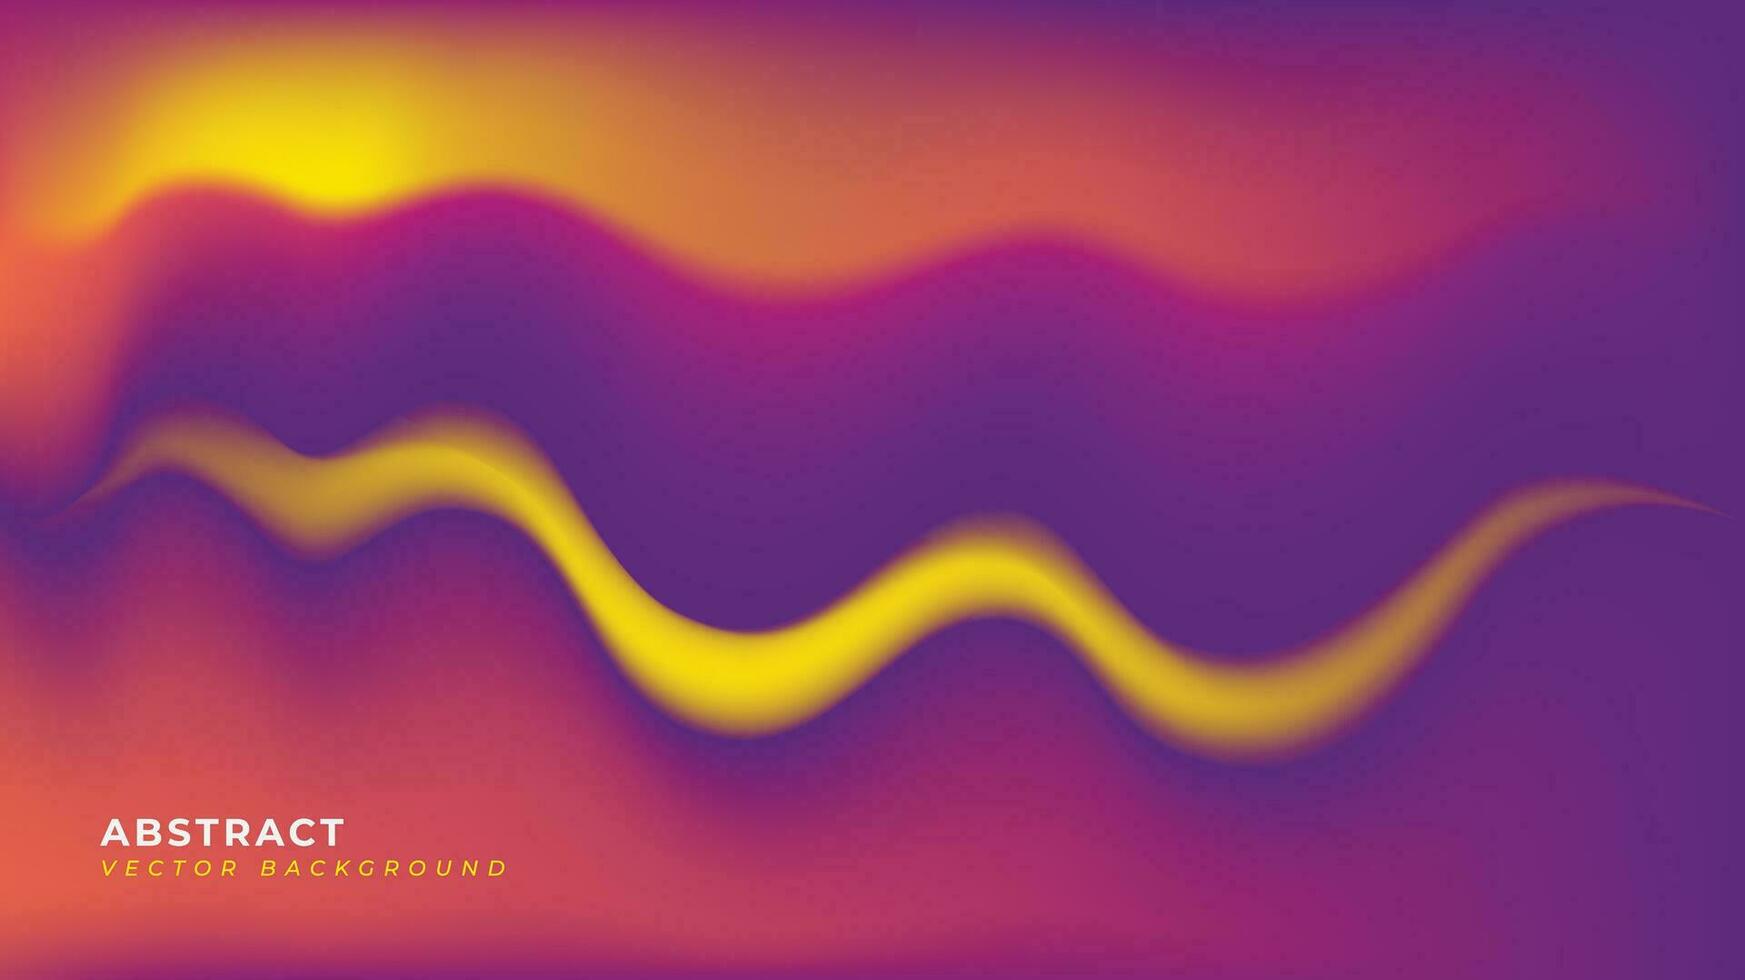 abstract vector bg yellow, orange, pink, purple curves gradients bright background